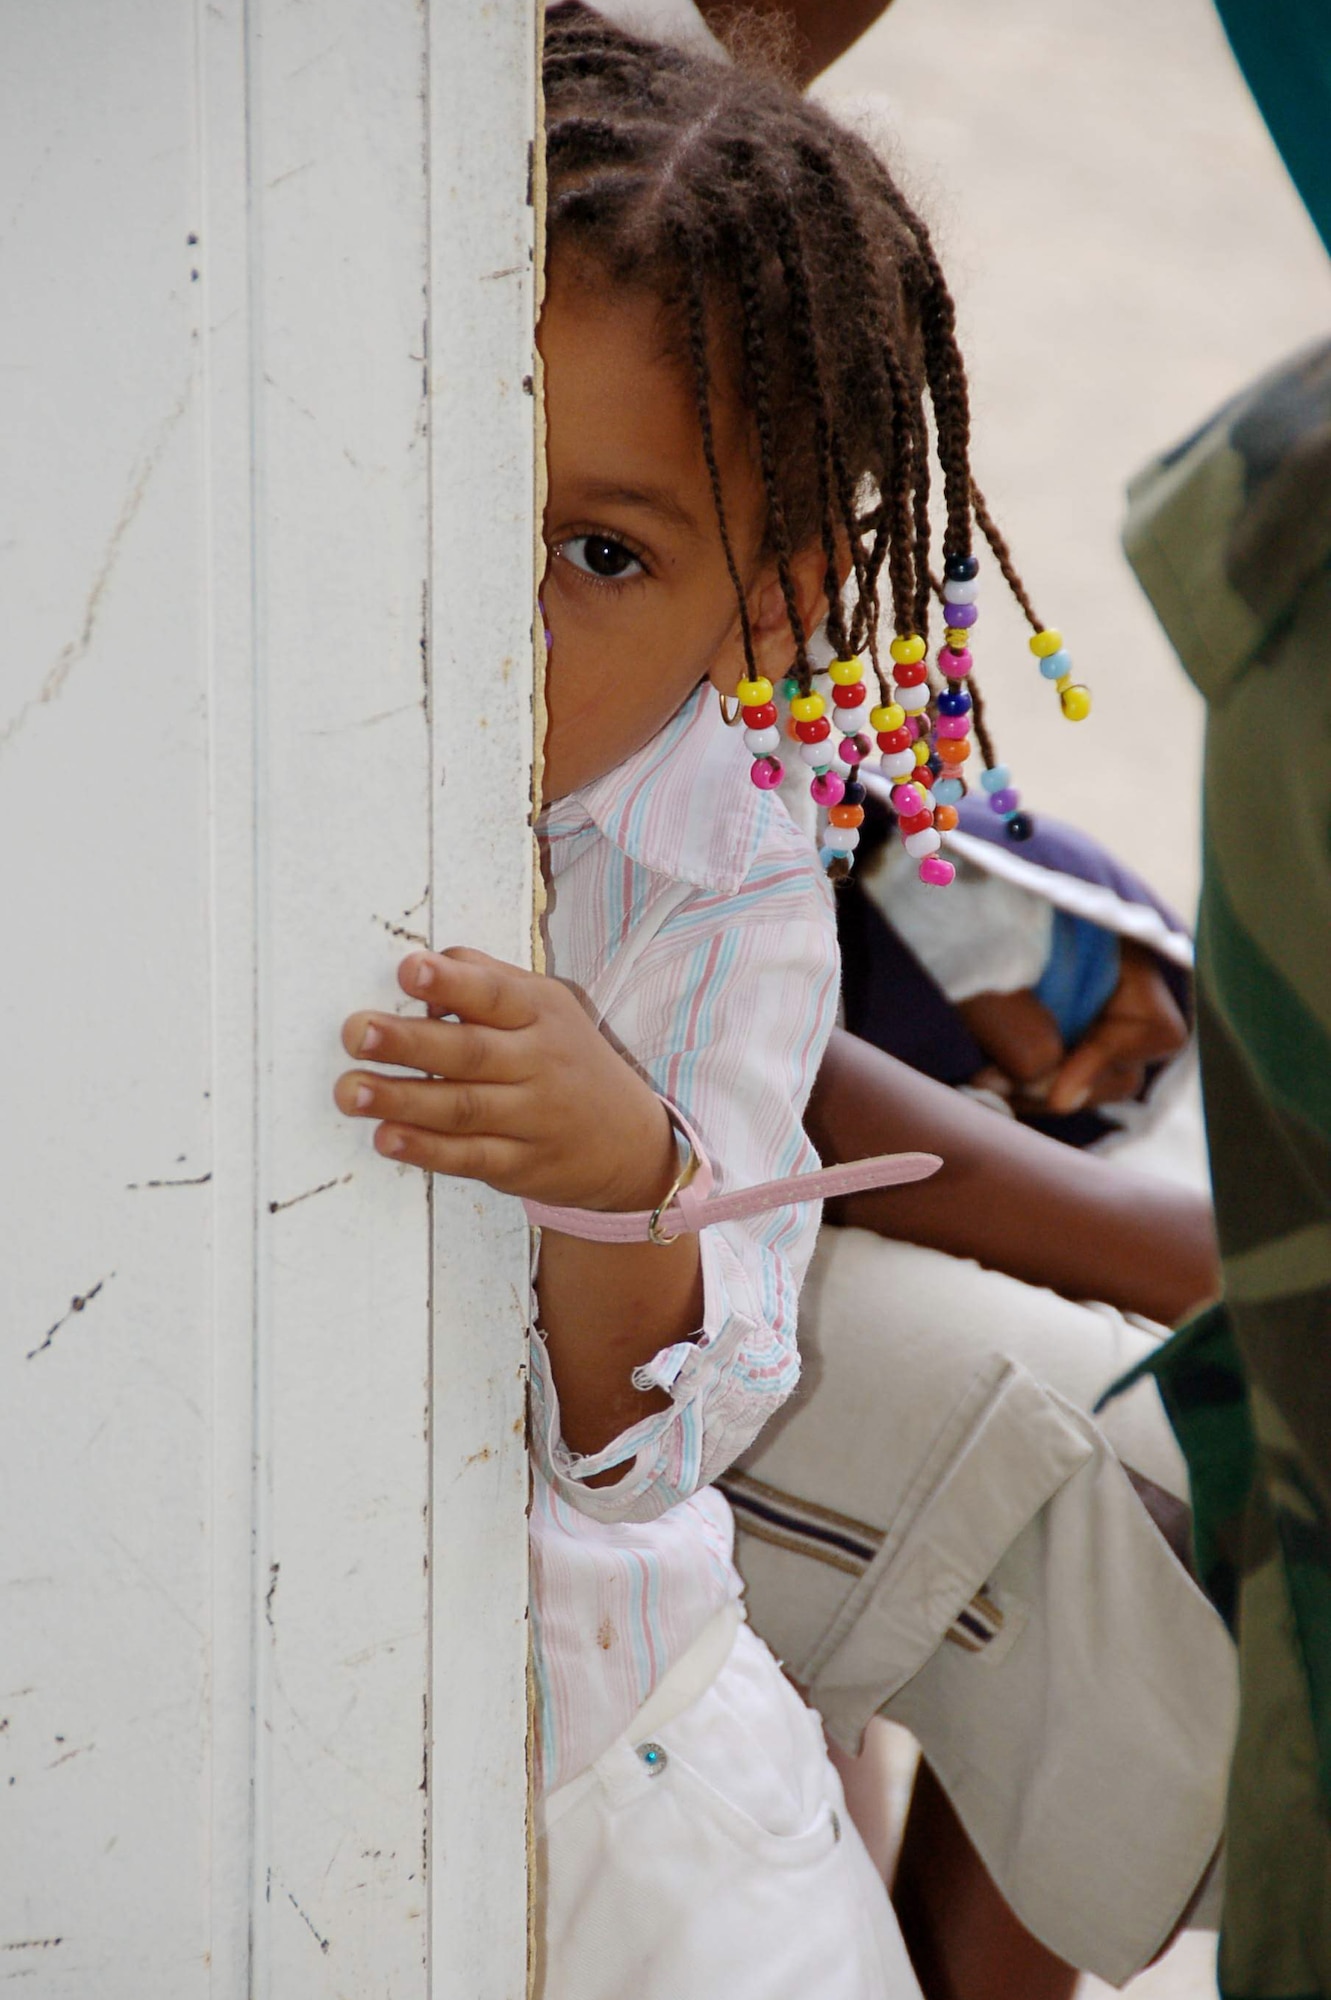 A small child cautiously peers into the pediatrician's room while awaiting her turn in line at a temporary clinic April 22 in Hostos, Dom. Rep., during the medical readiness exercise, Beyond the Horizon 2009 - Caribbean.  The medics treated 2,800 patients during the first three days of the U.S. Southern Command sponsored MEDRETE.  (U.S. Air Force photo/Capt. Ben Sakrisson) 